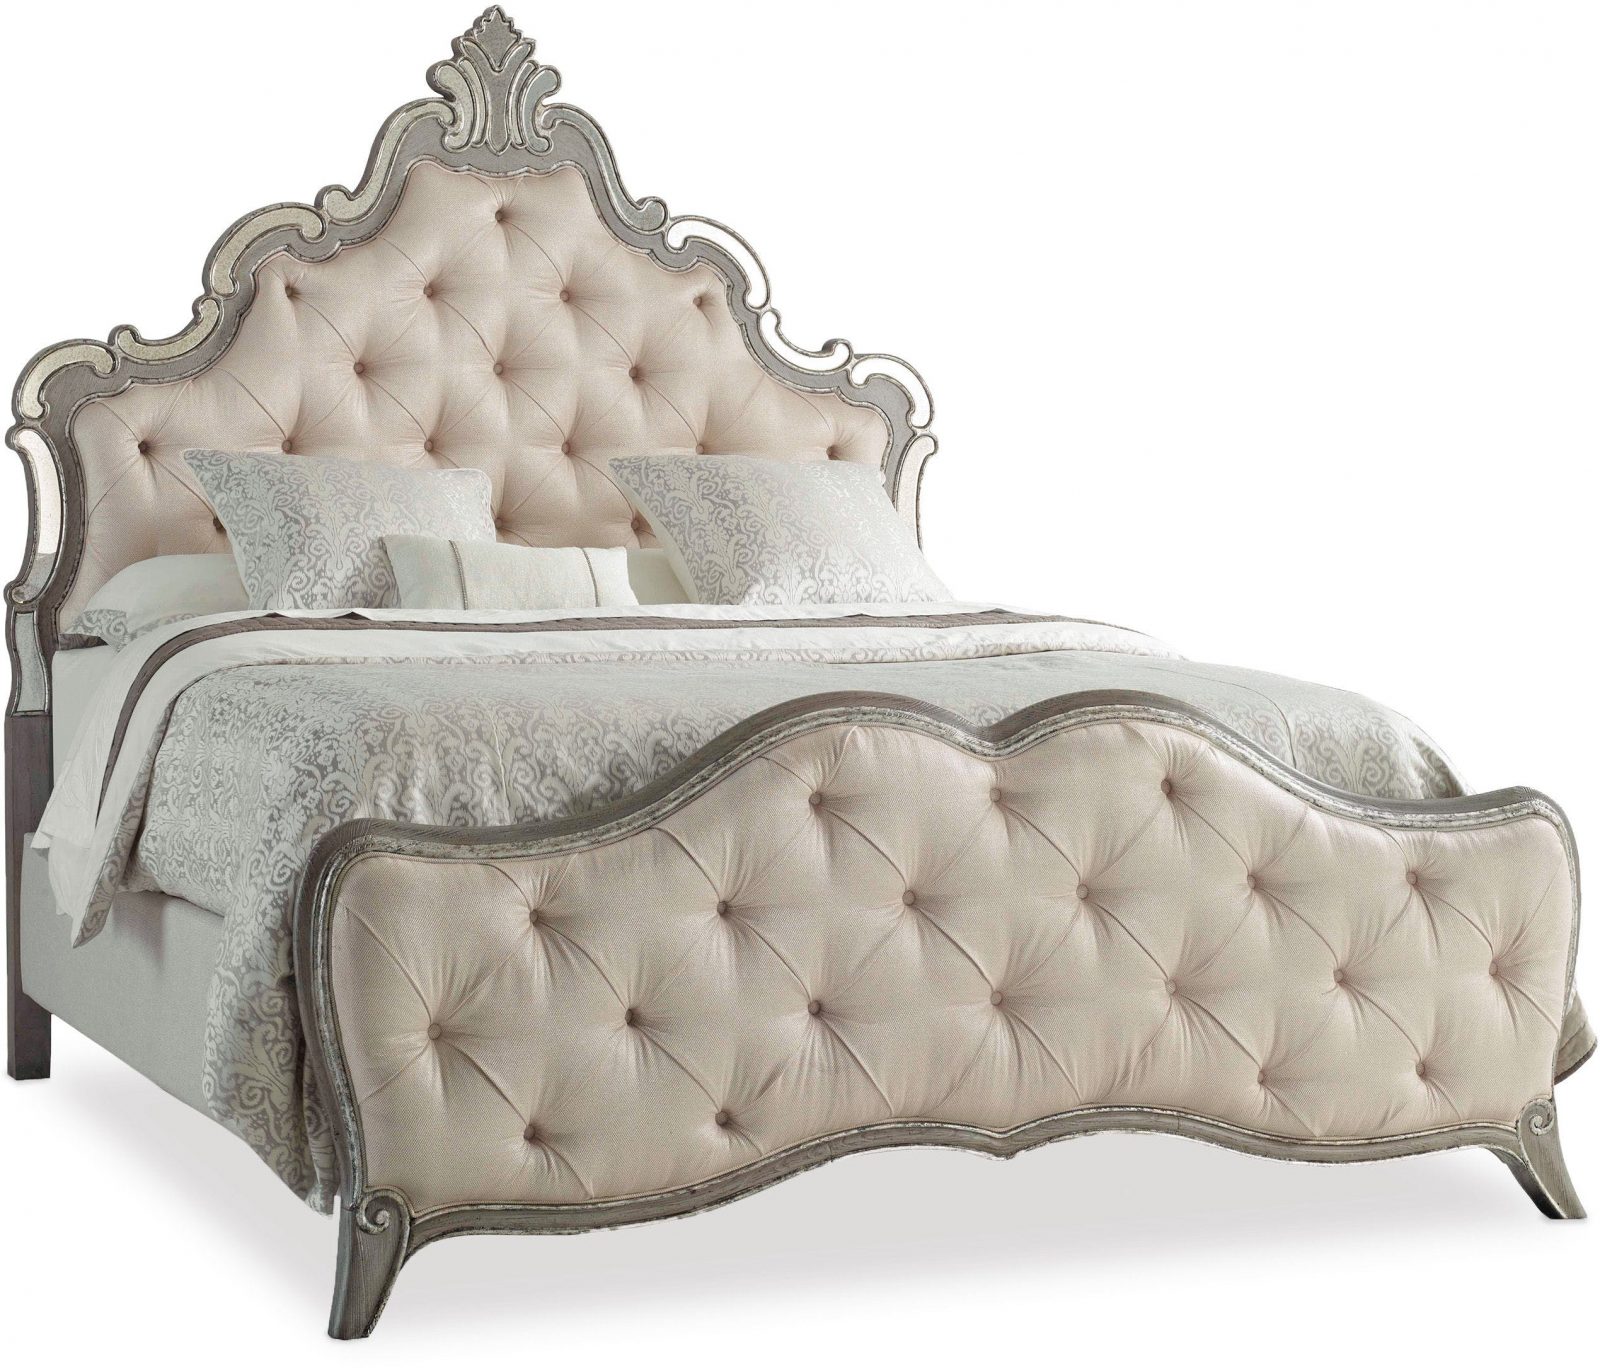 Sanctuary Epoque Upholstered Panel bed 6/6 King